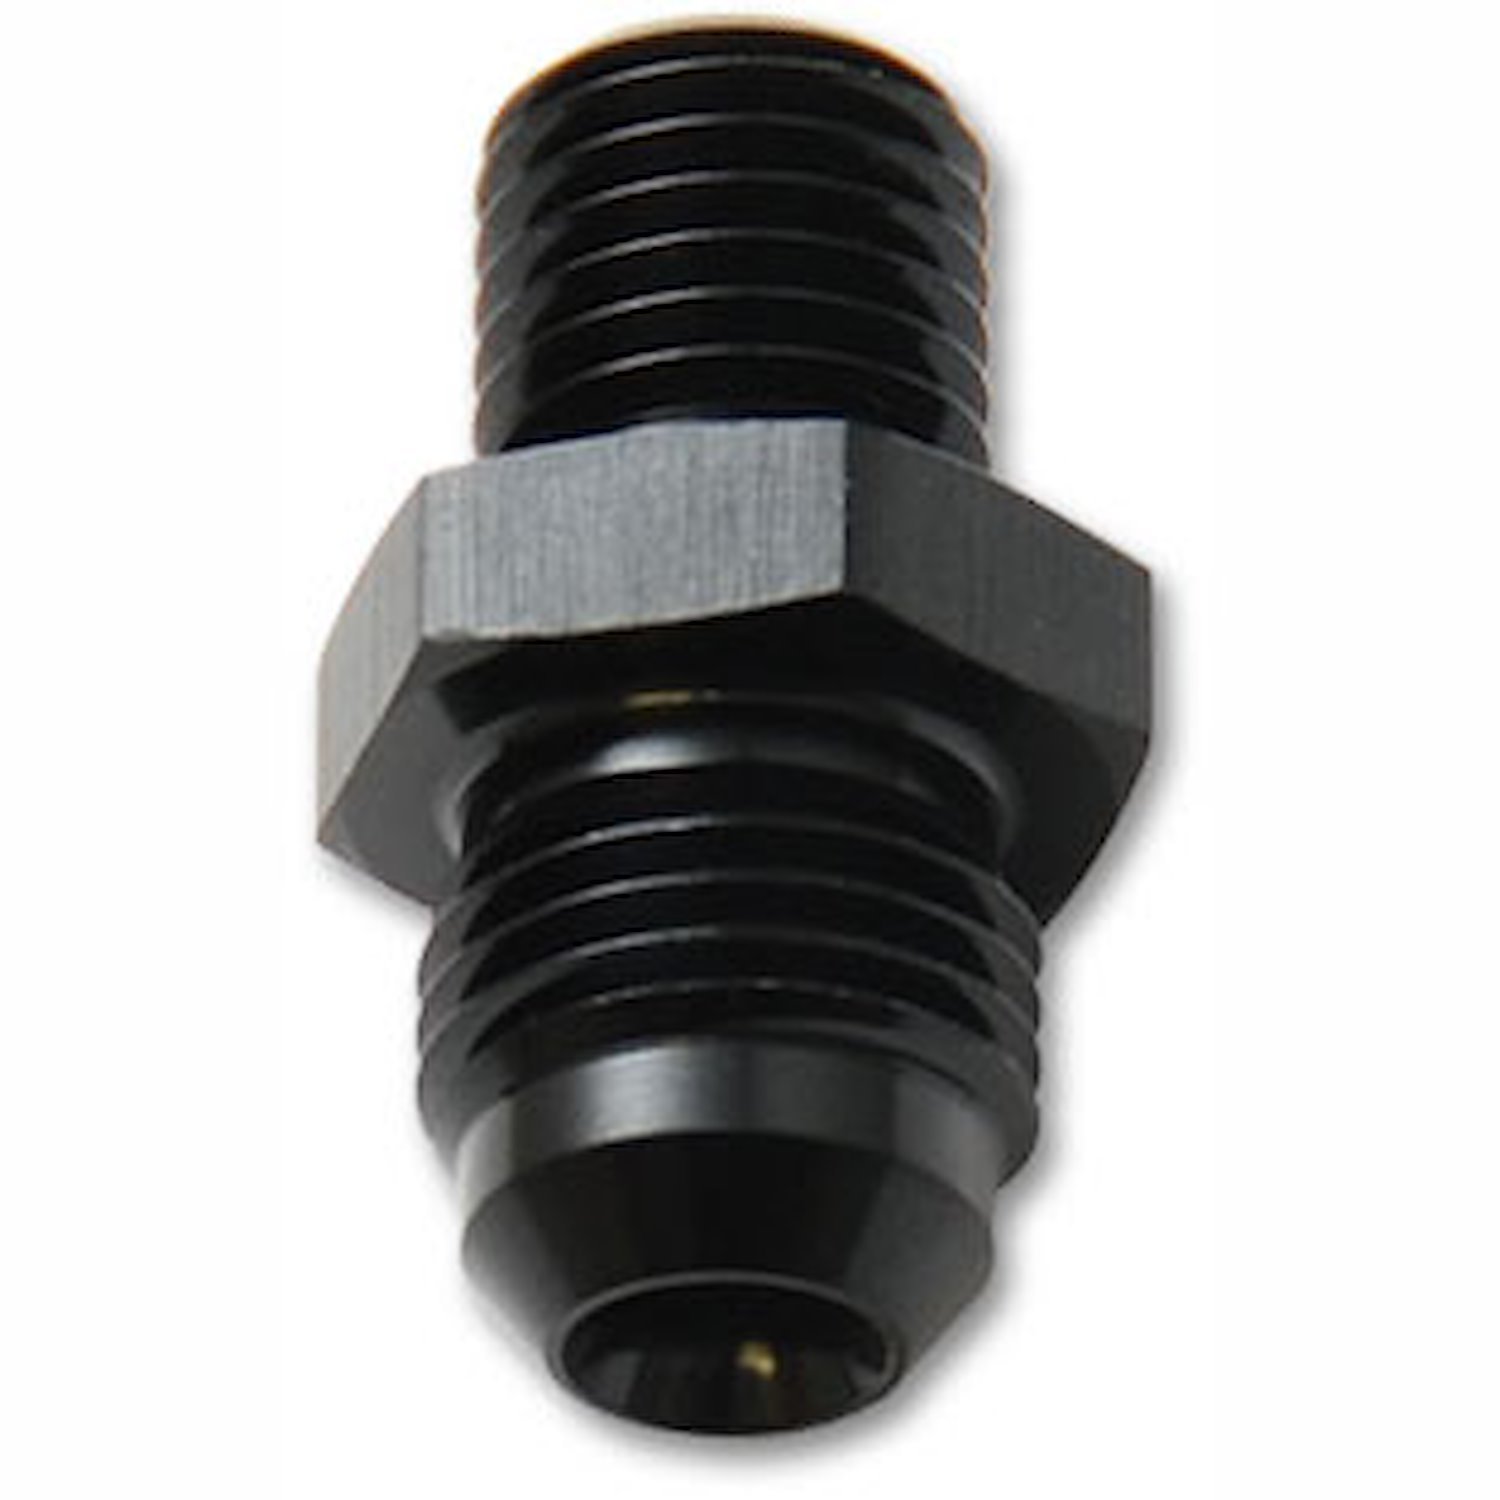 Vibrant Performance 16615 16615-6AN to 12mm x 1.25 Metric Straight Adapter 